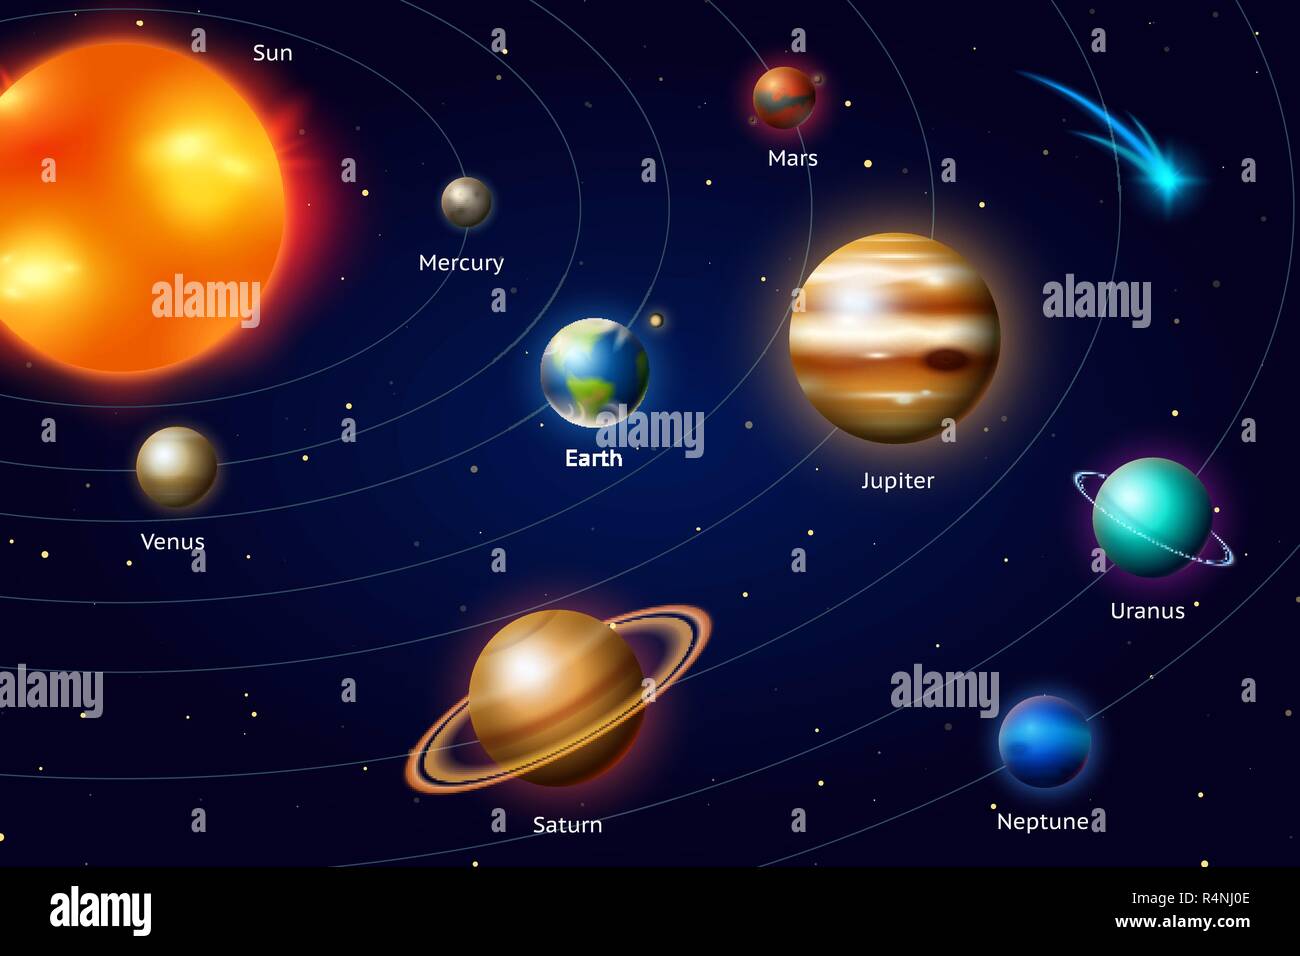 Planets Of The Solar System Milky Way Space And Astronomy